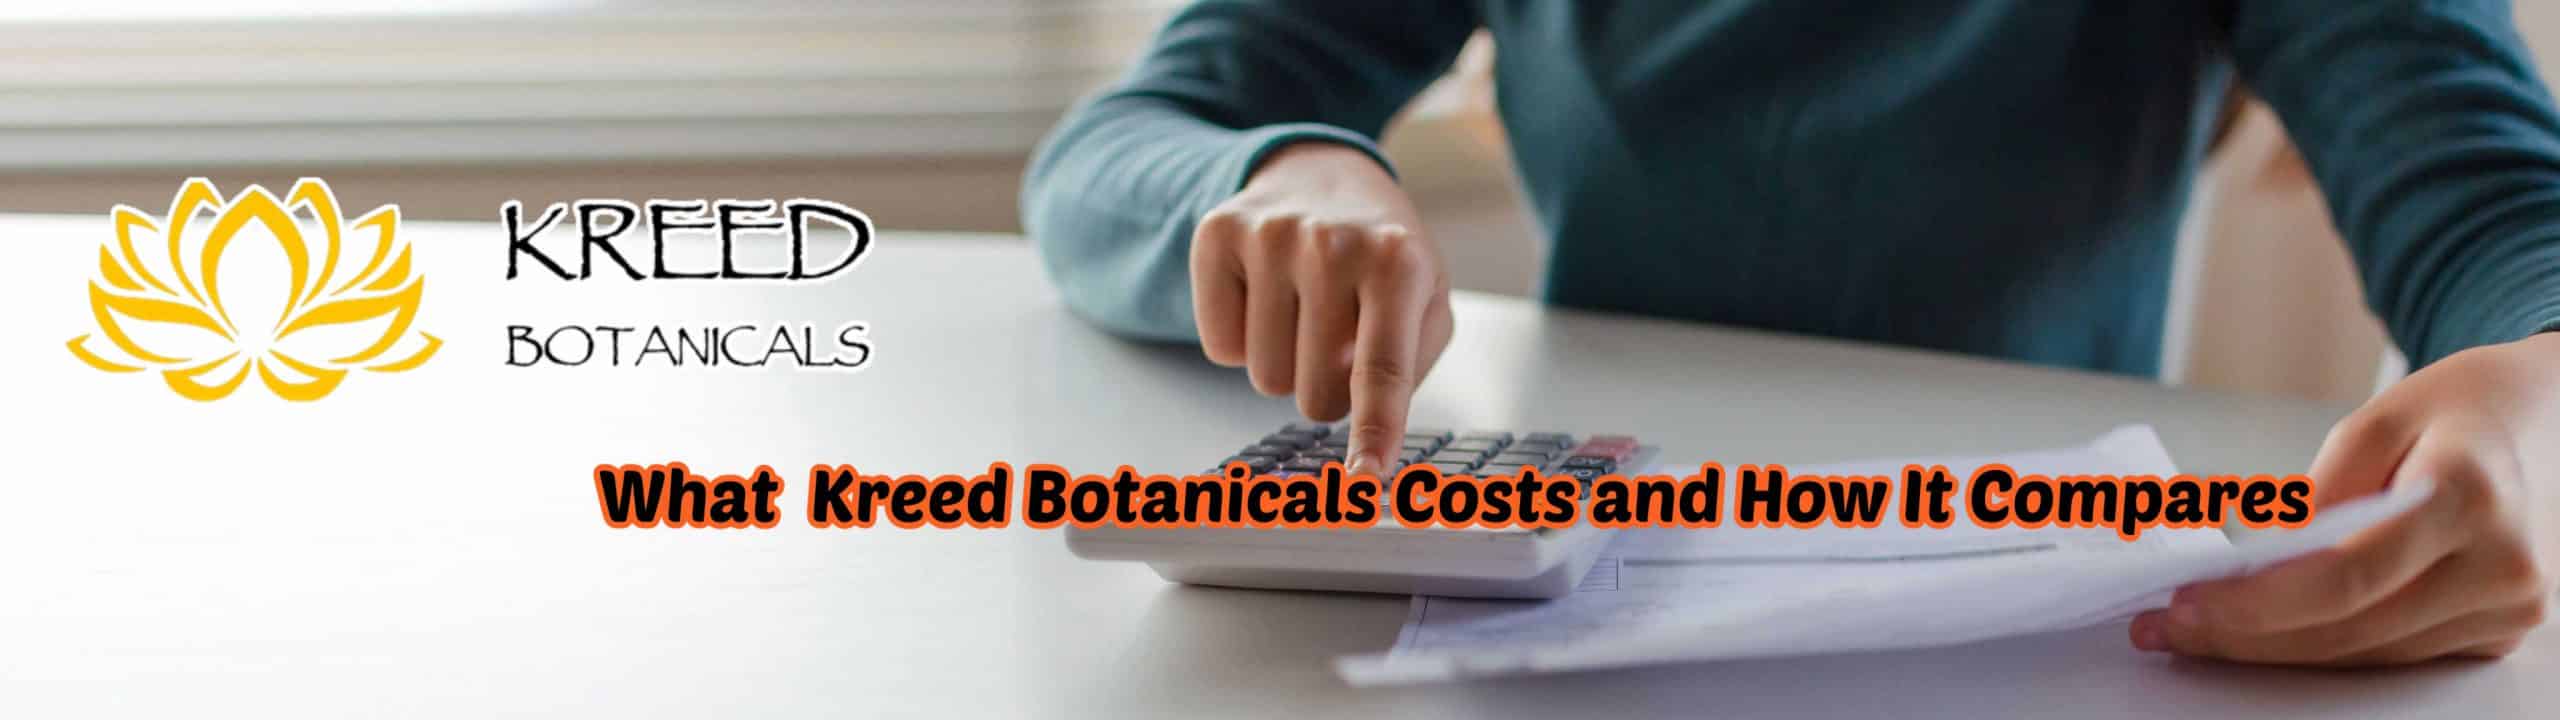 image of what kreed botanicals cost and how it compares